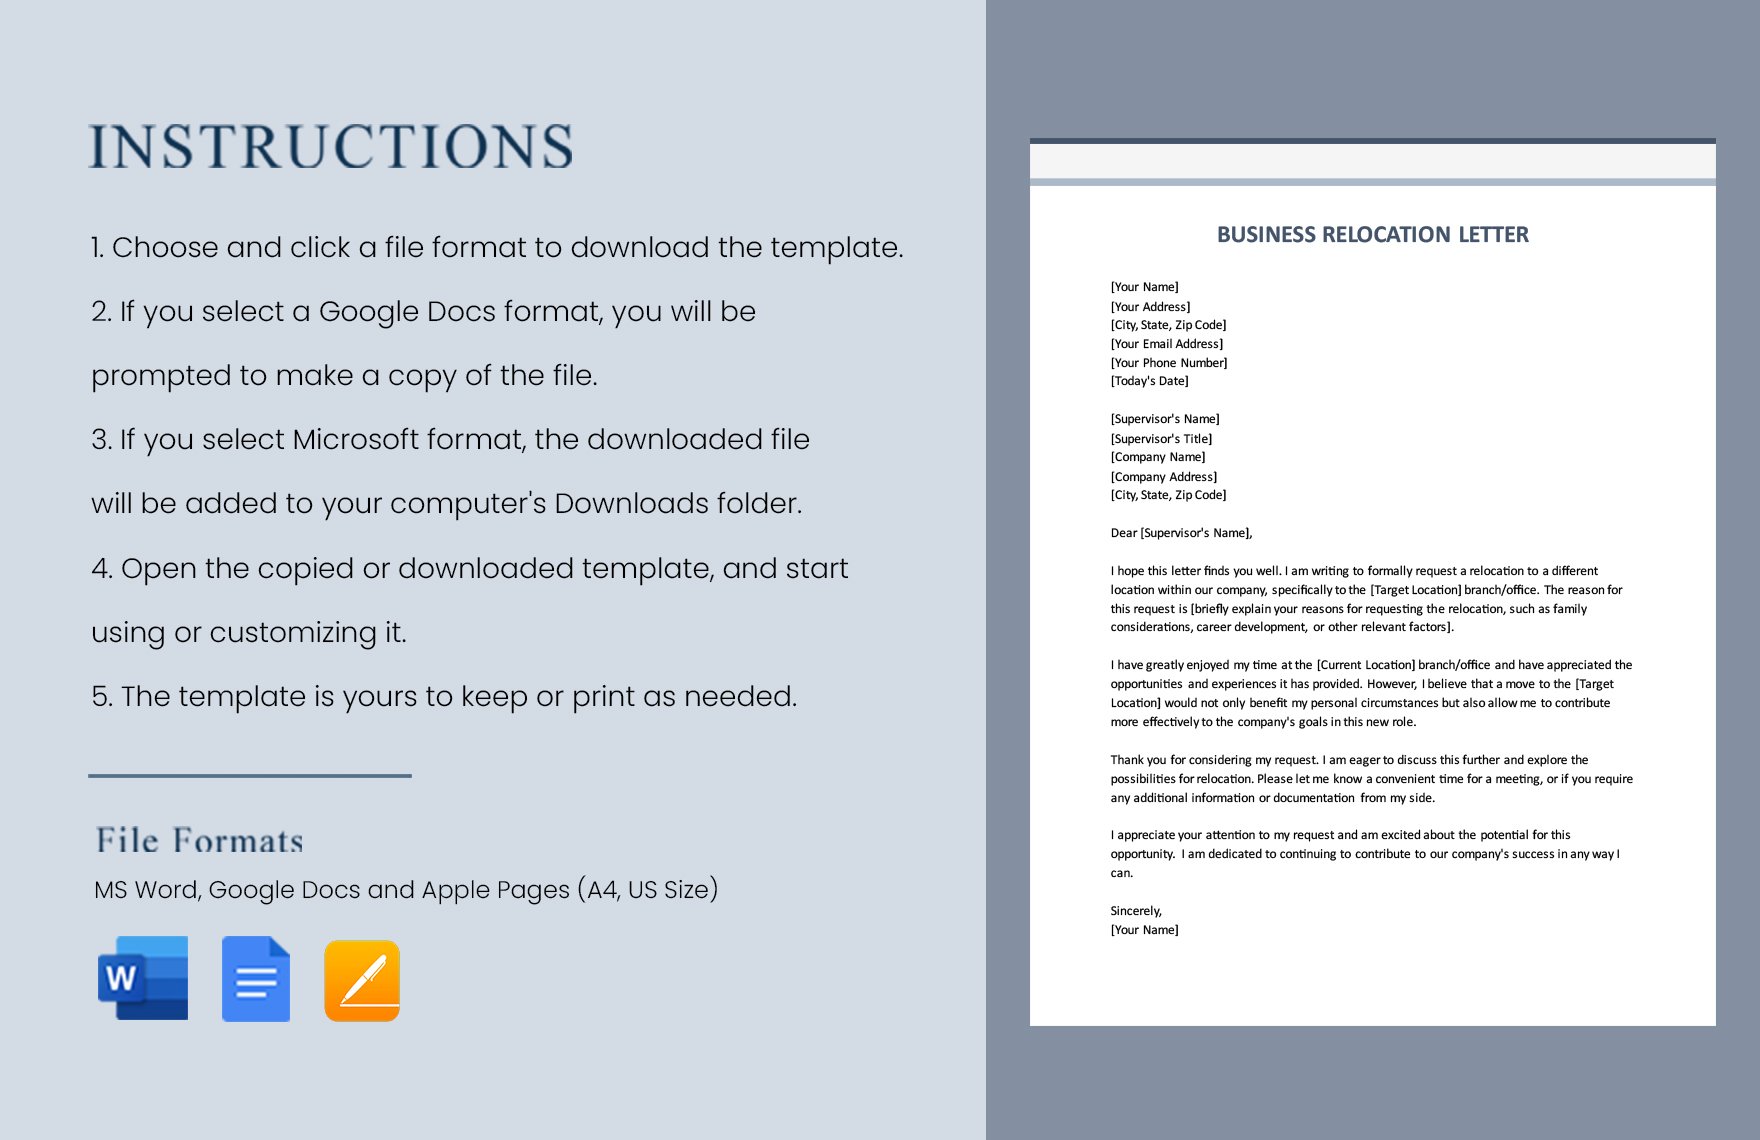 Business Relocation Letter